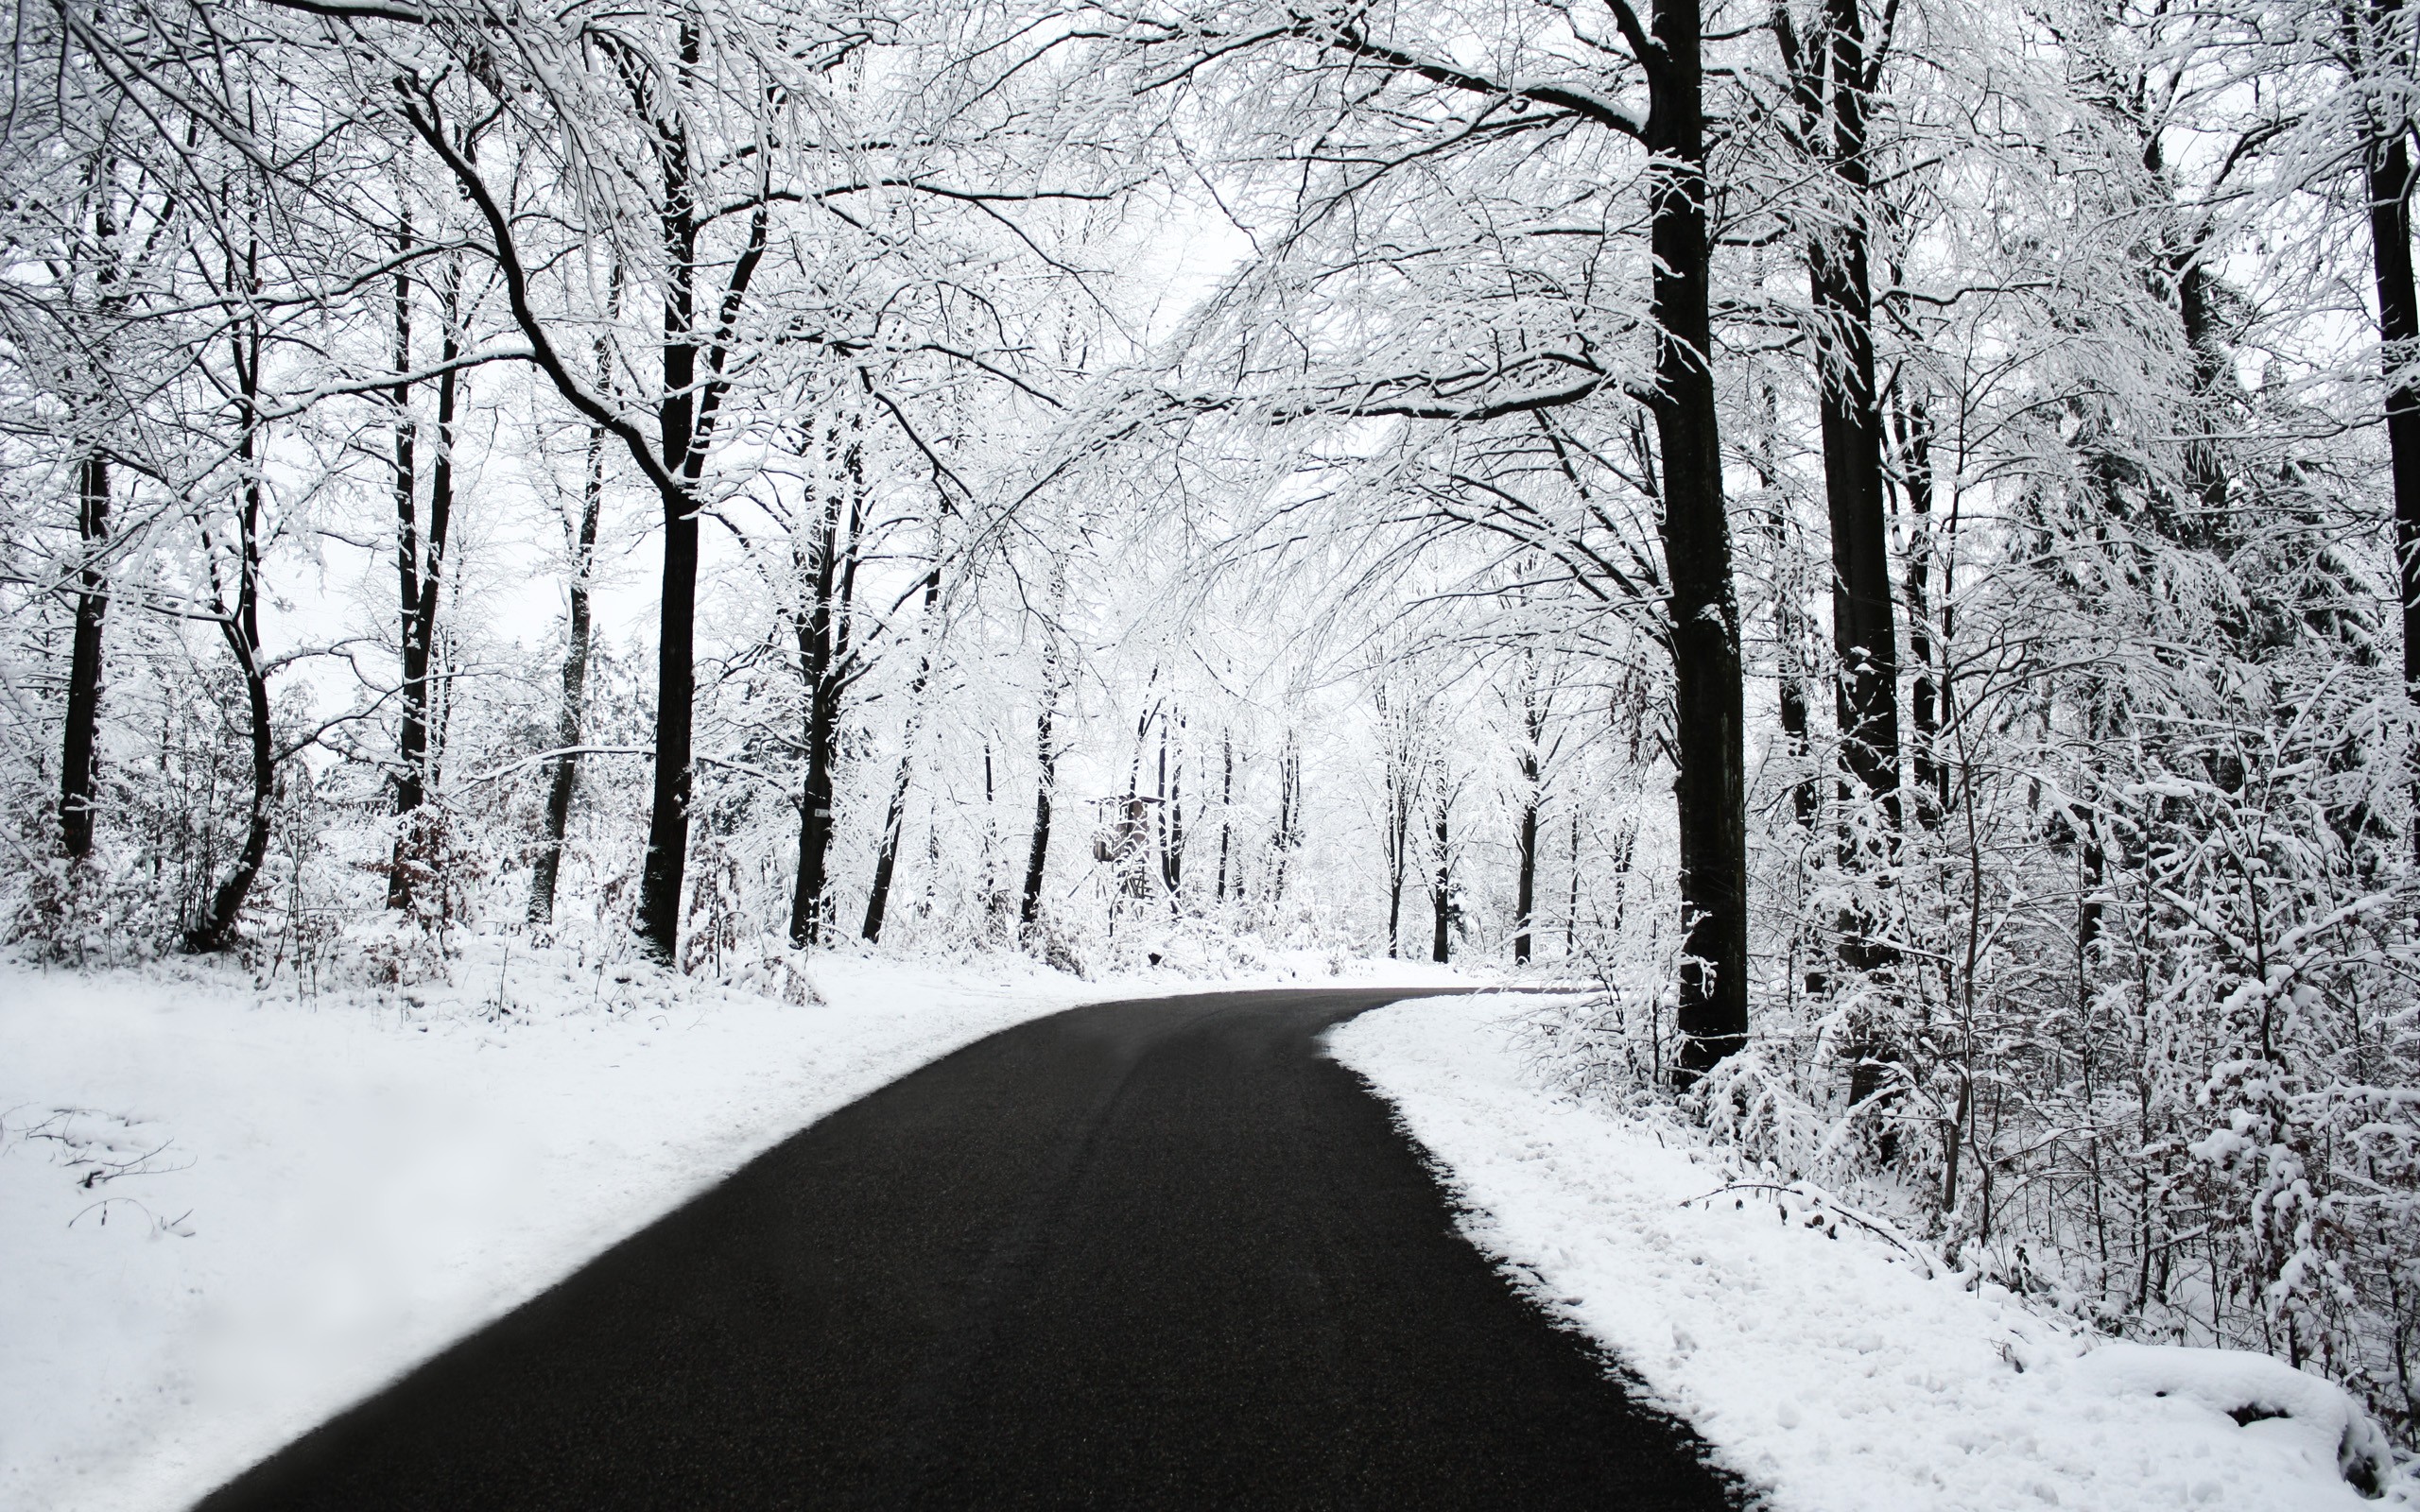 General 2560x1600 road snow trees black white winter forest nature